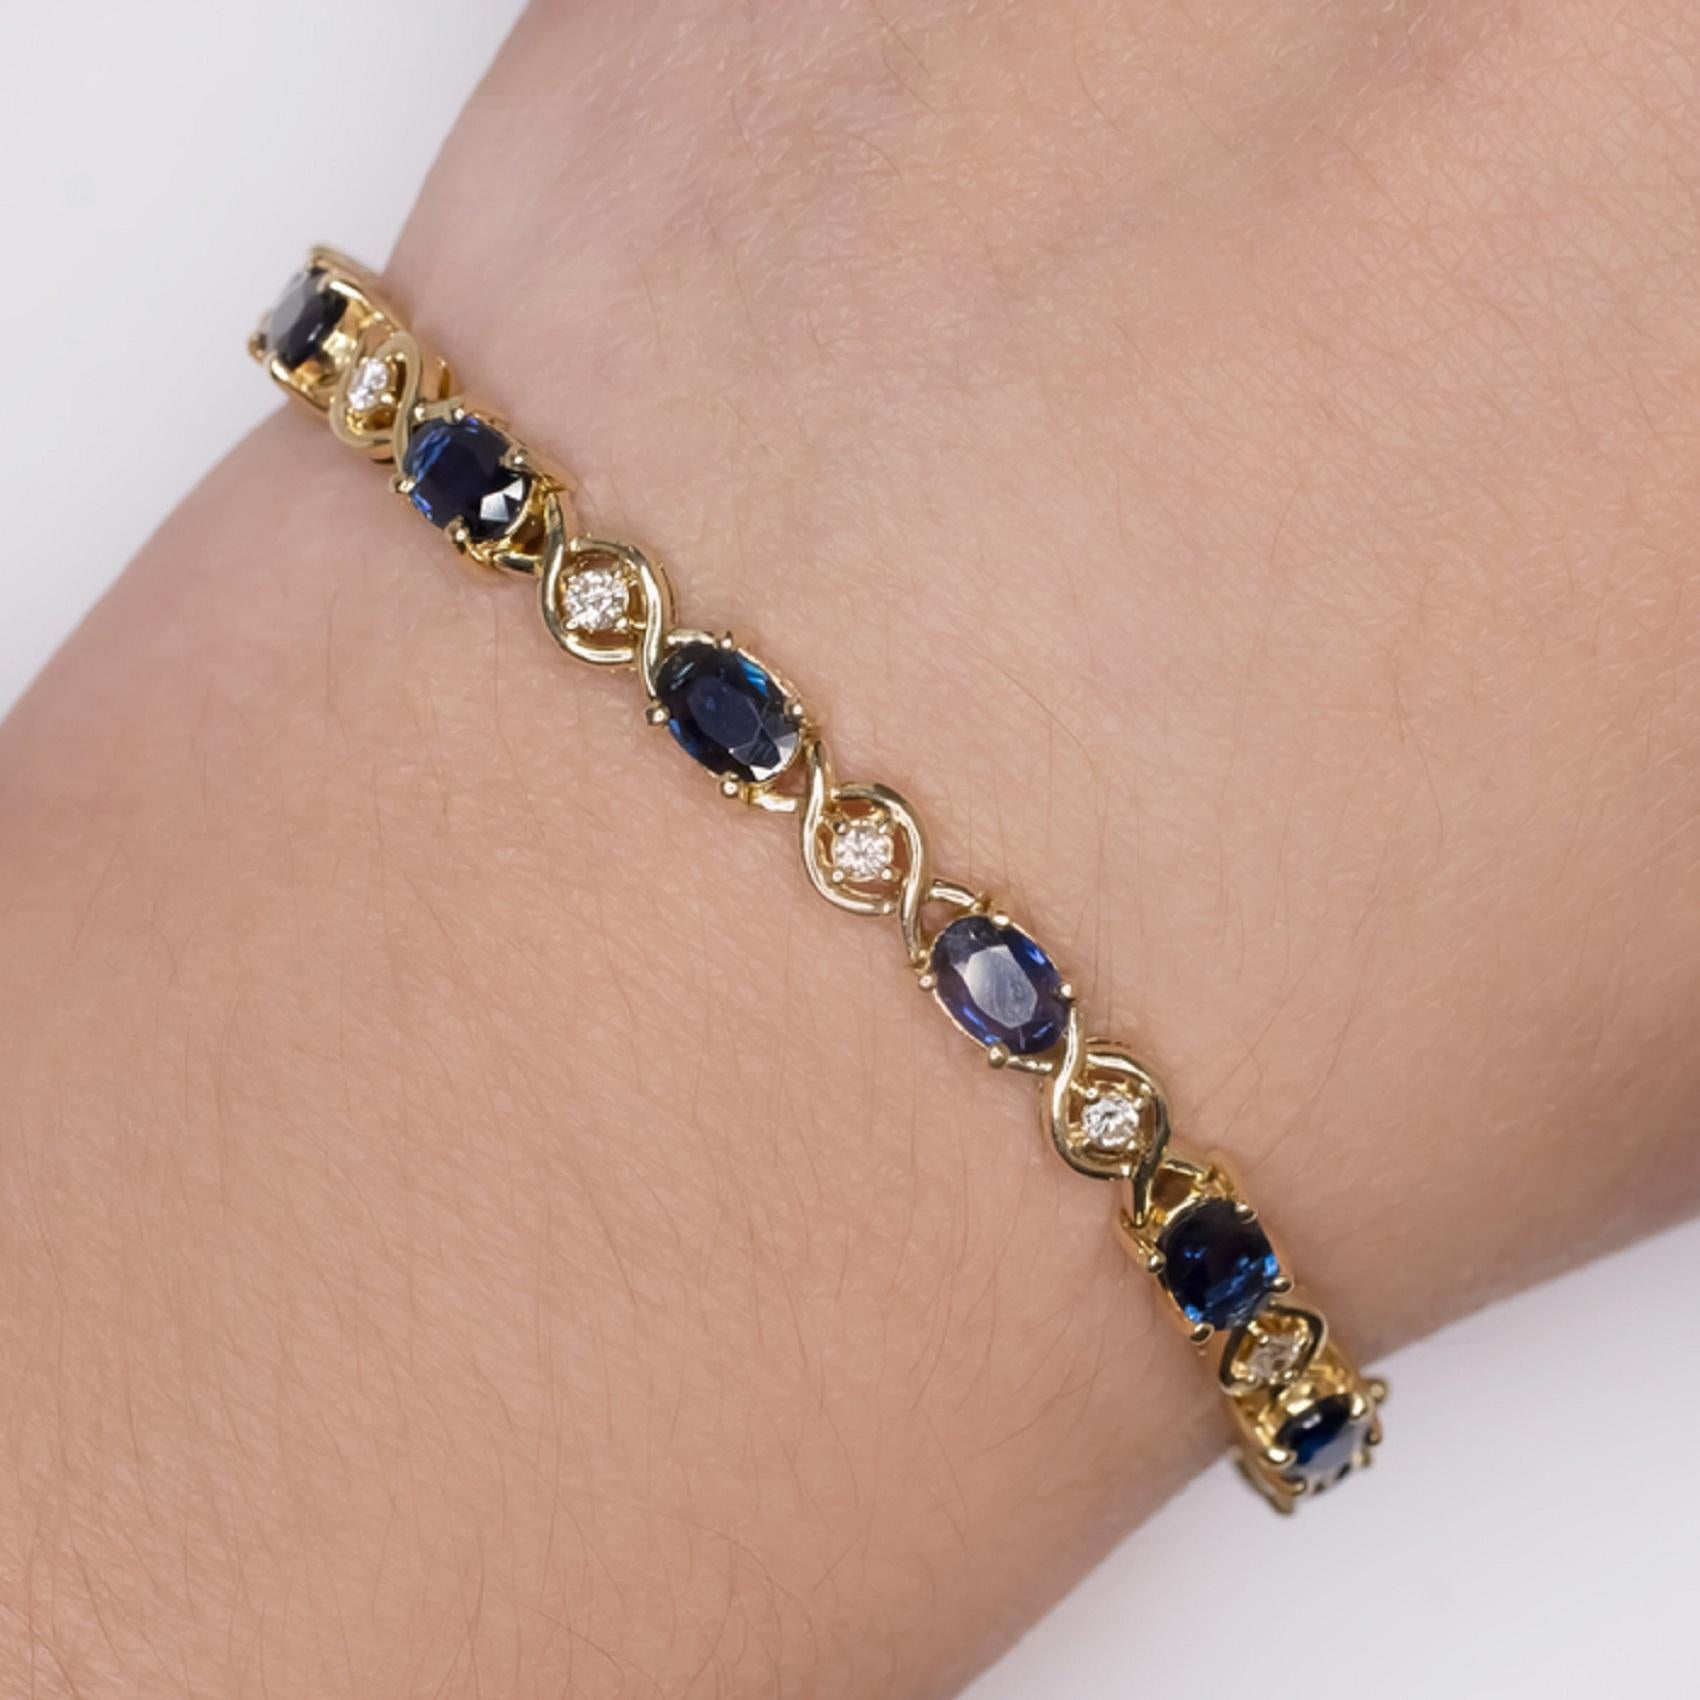 This sapphire and diamond bracelet offers a rich pop of color and a classic, refined look! Vibrant natural diamonds are interspersed with 7.8 carats of rich blue natural sapphires for eye catching contrast and sparkle! The sapphires are beautiful in